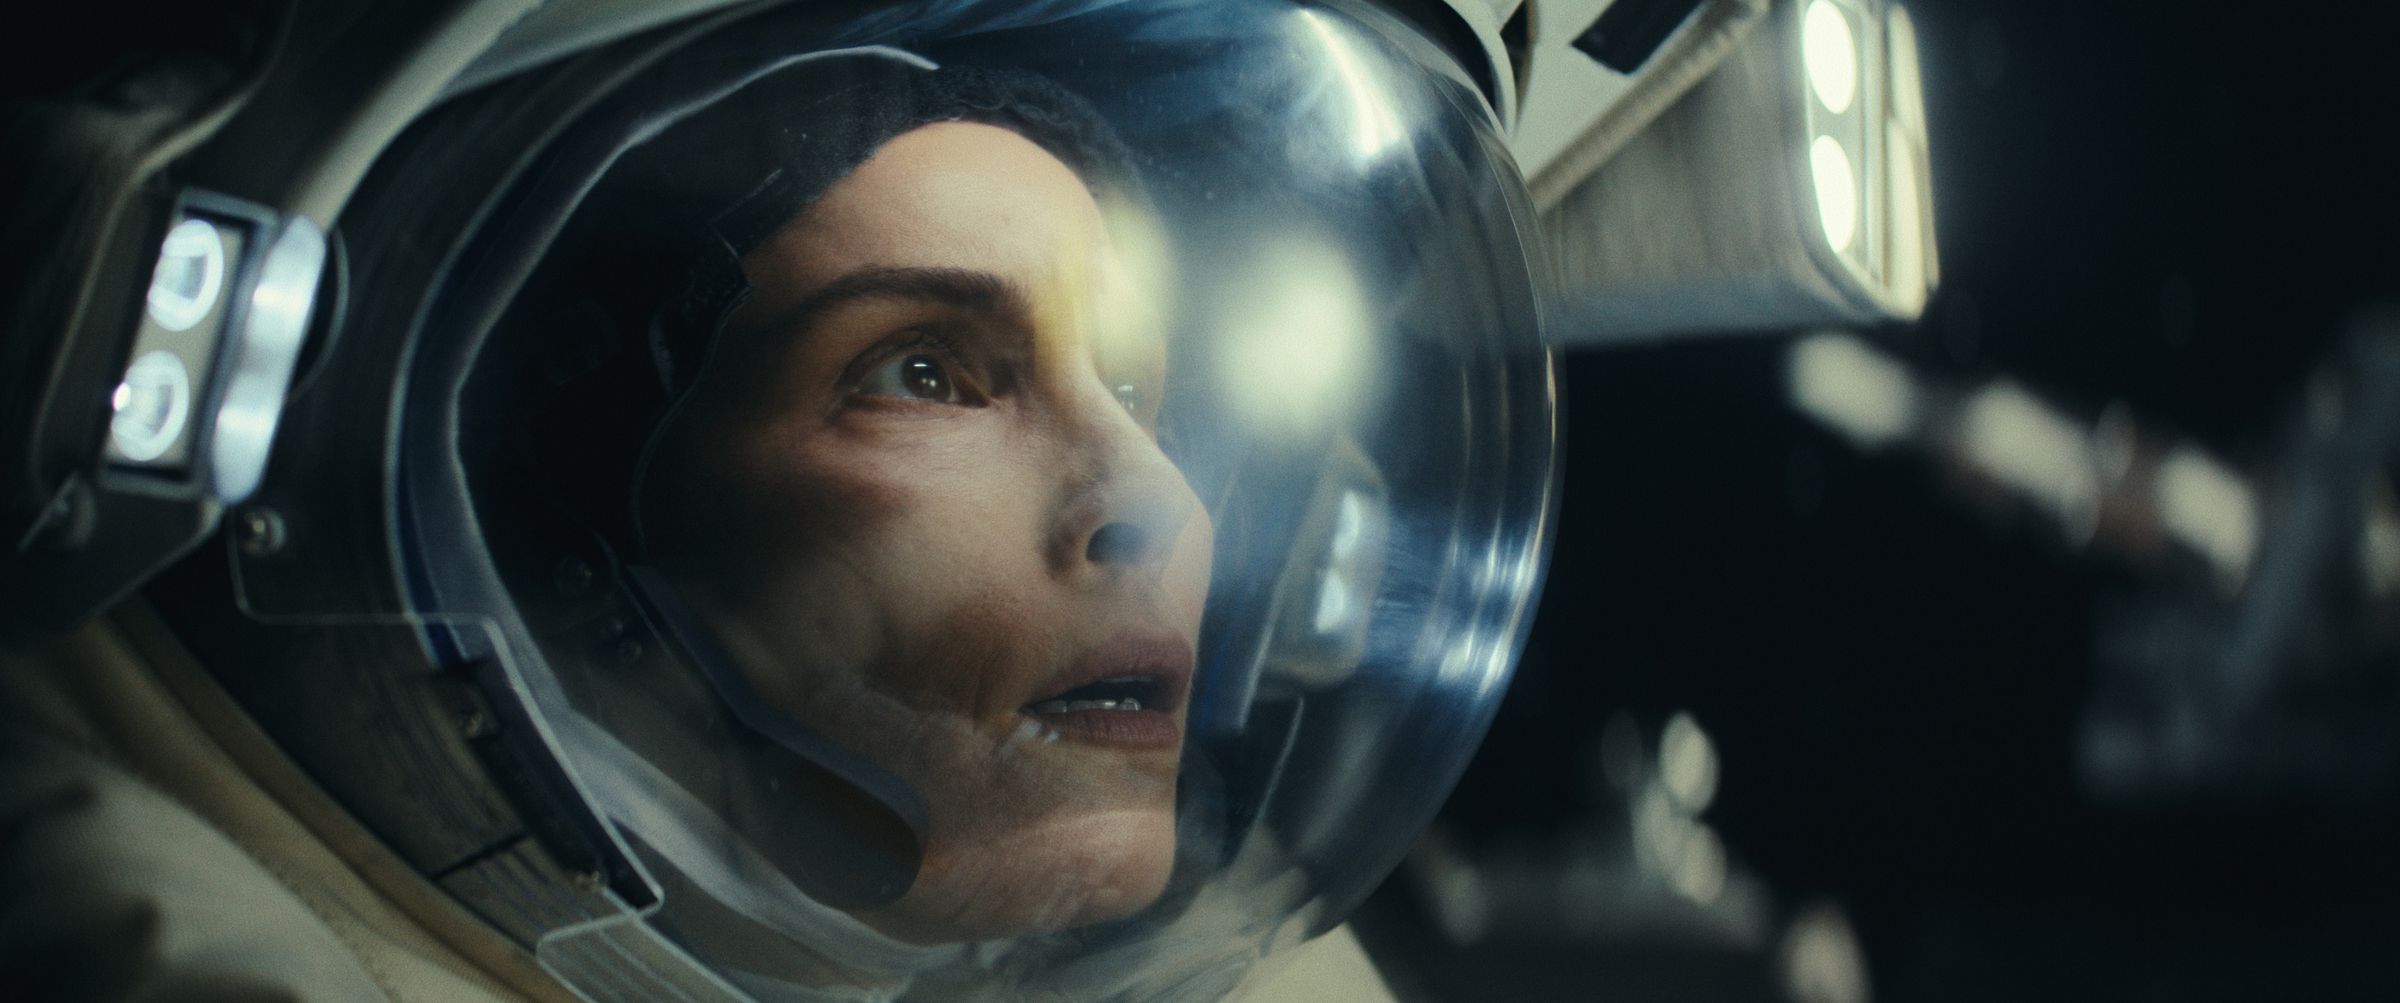 Picture of Noomi Rapace wearing an astronaut’s helmet, looking at something anxiously&nbsp;in a scene from the sci-fi TV series Constellation.